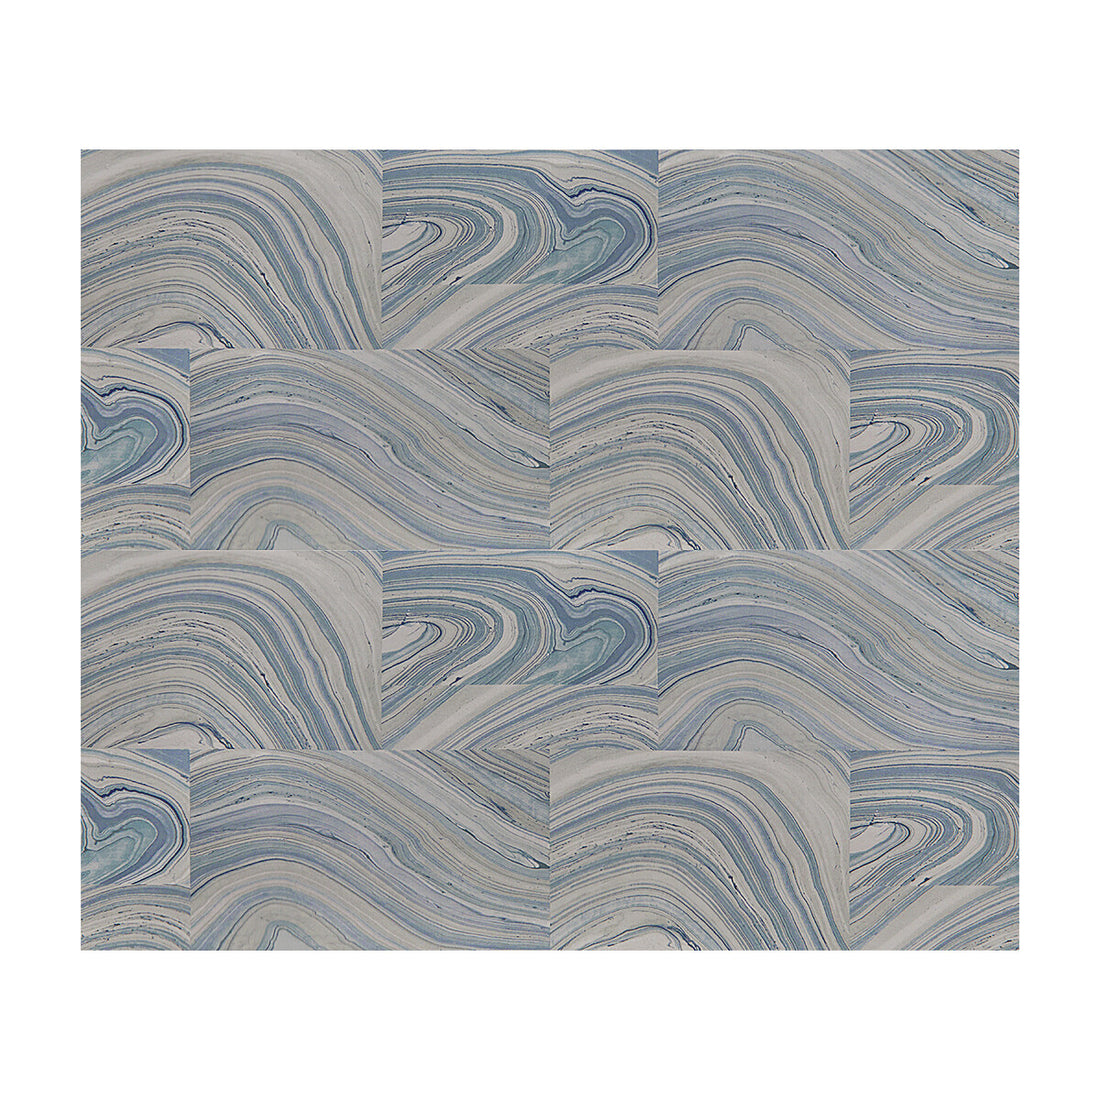 Marblework fabric in lake color - pattern MARBLEWORK.5.0 - by Kravet Design in the Candice Olson collection